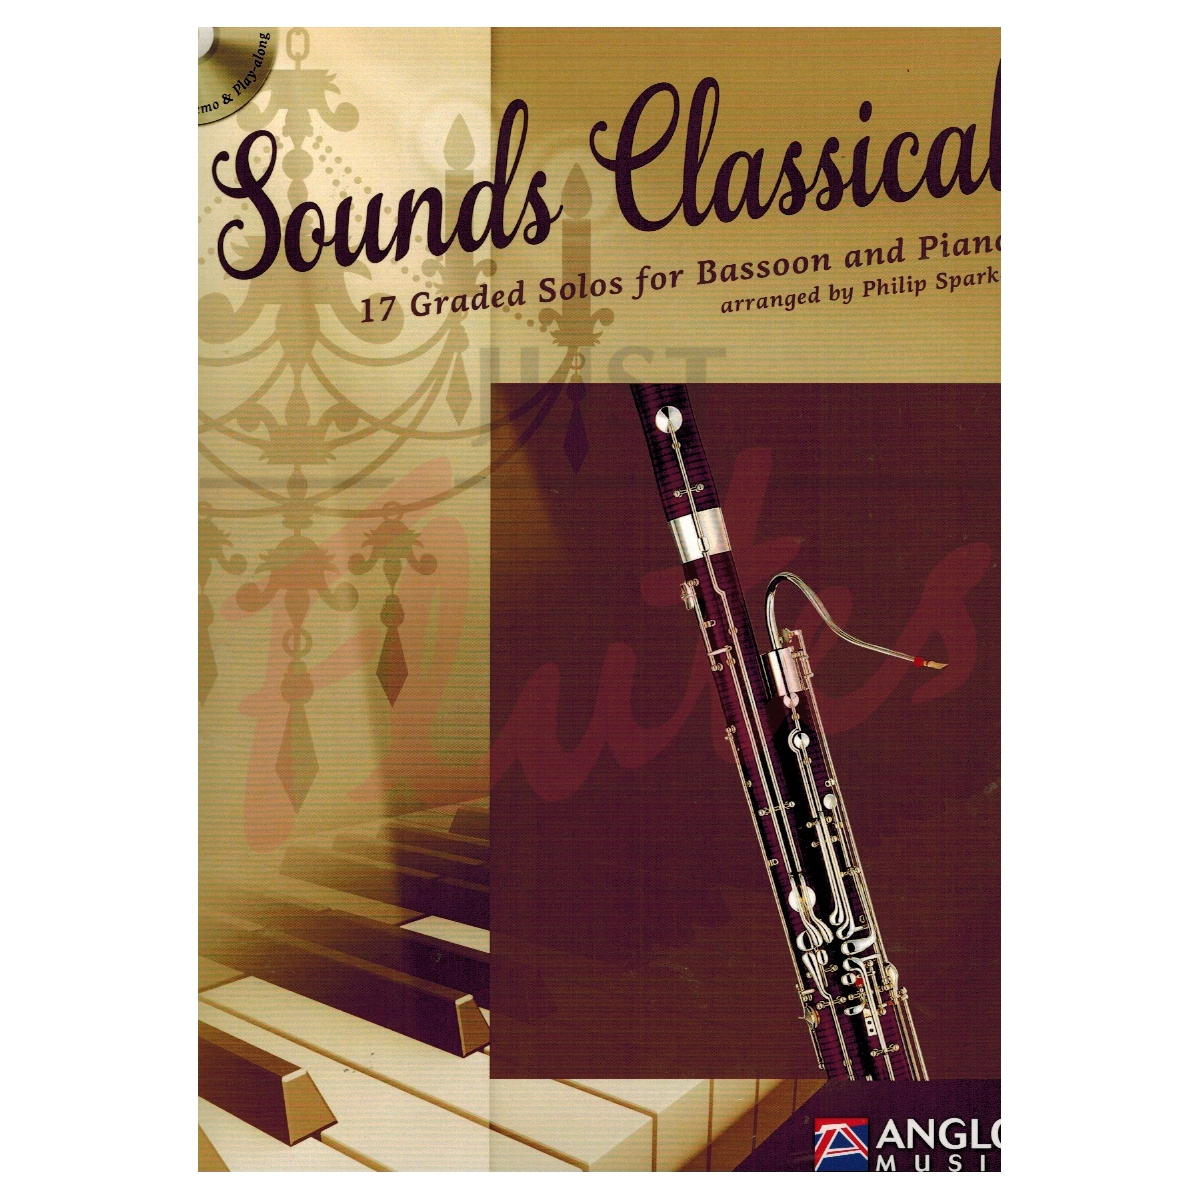 Sounds Classical [Bassoon]